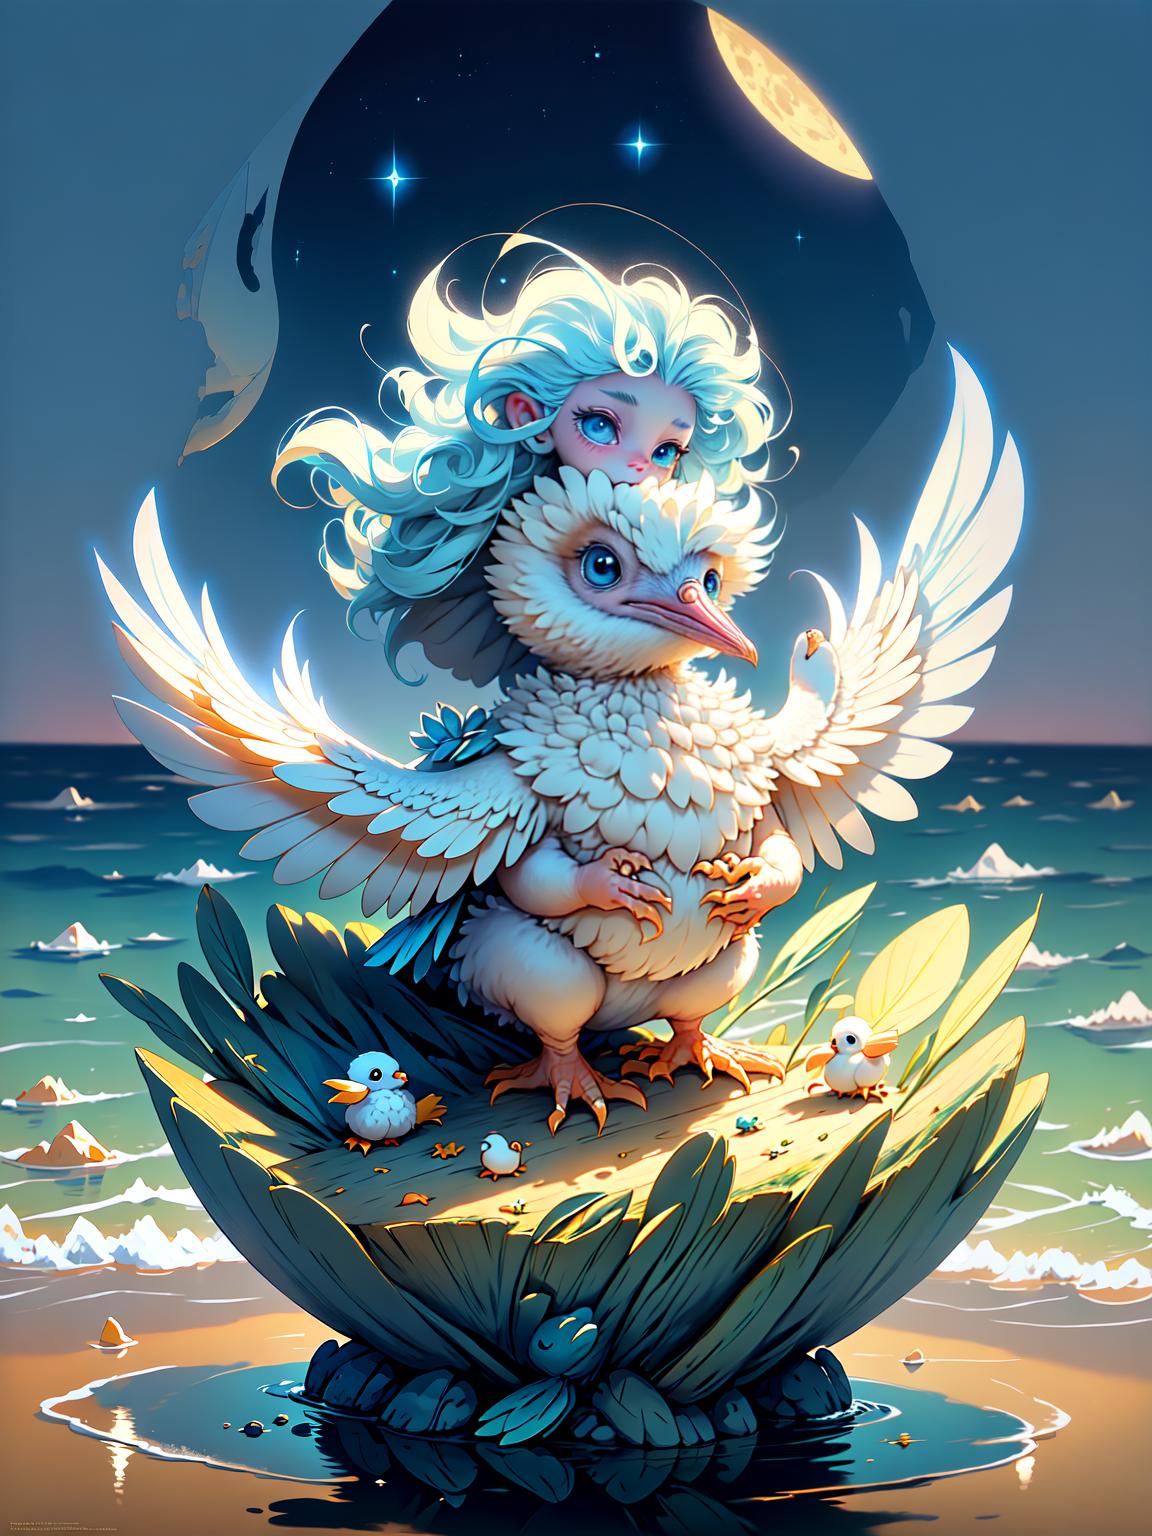  master piece, best quality, ultra detailed, highres, 4k.8k, Pelican, Carrying a baby in its beak, Gentle, BREAK Pelican carrying a baby, Angelic and gentle space., Blue sky with fluffy white clouds, Baby blanket, pacifier, small toys, BREAK Serene and peaceful, Soft light, a warm aura surrounding the characters, Cu73Cre4ture